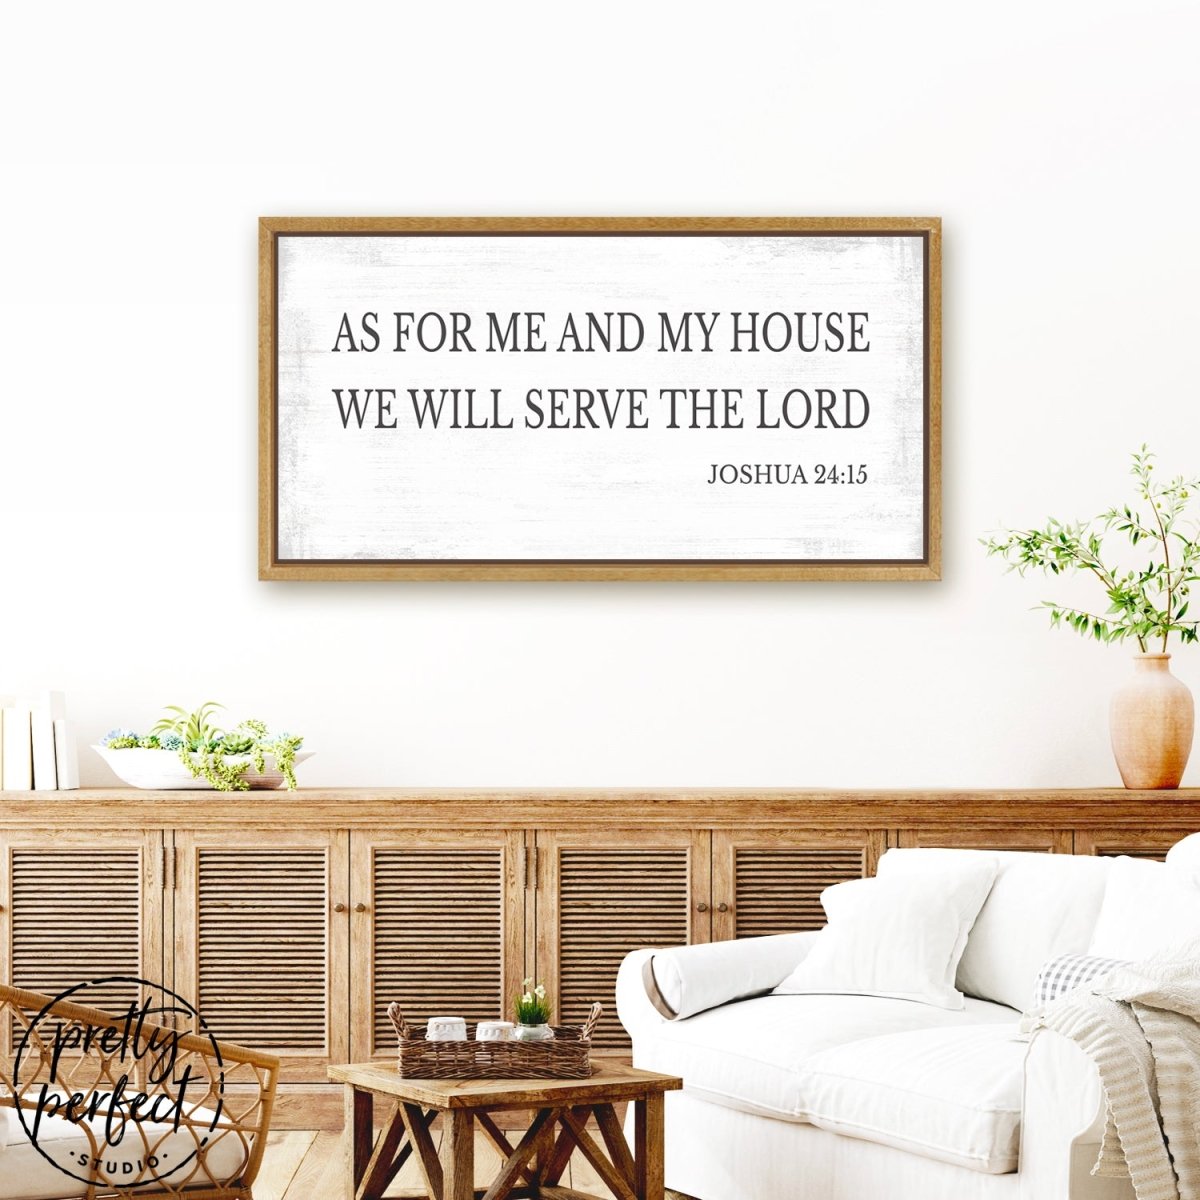 As For Me And My House We Will Serve The Lord Sign in Living Room Above Shelf - Pretty Perfect Studio